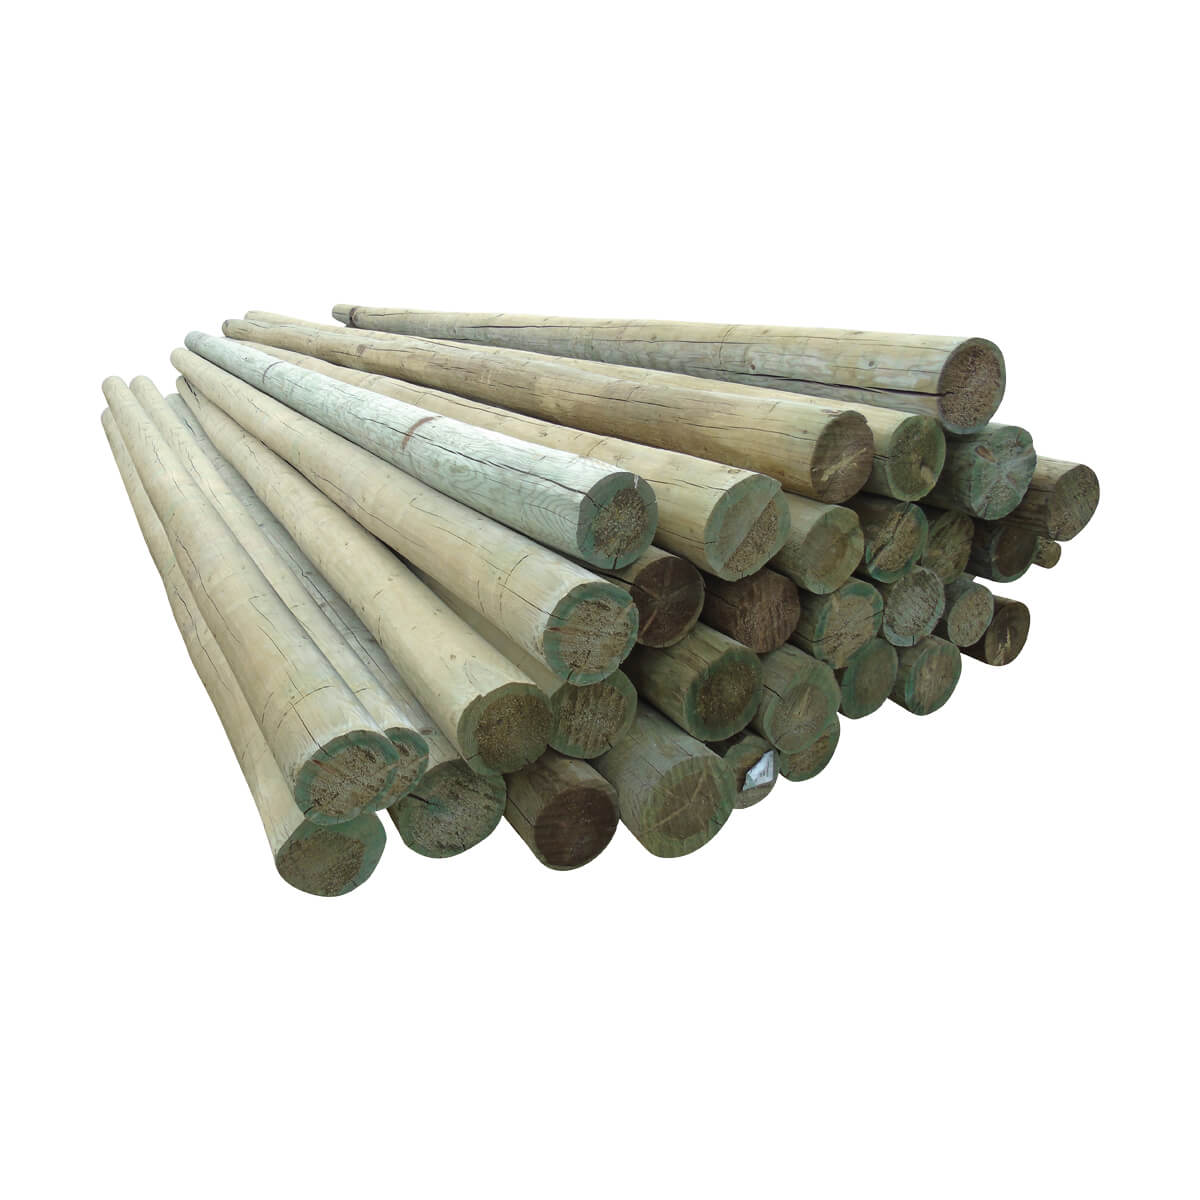 Peeled Fence Poles - Blunt - 6-in x 25-ft